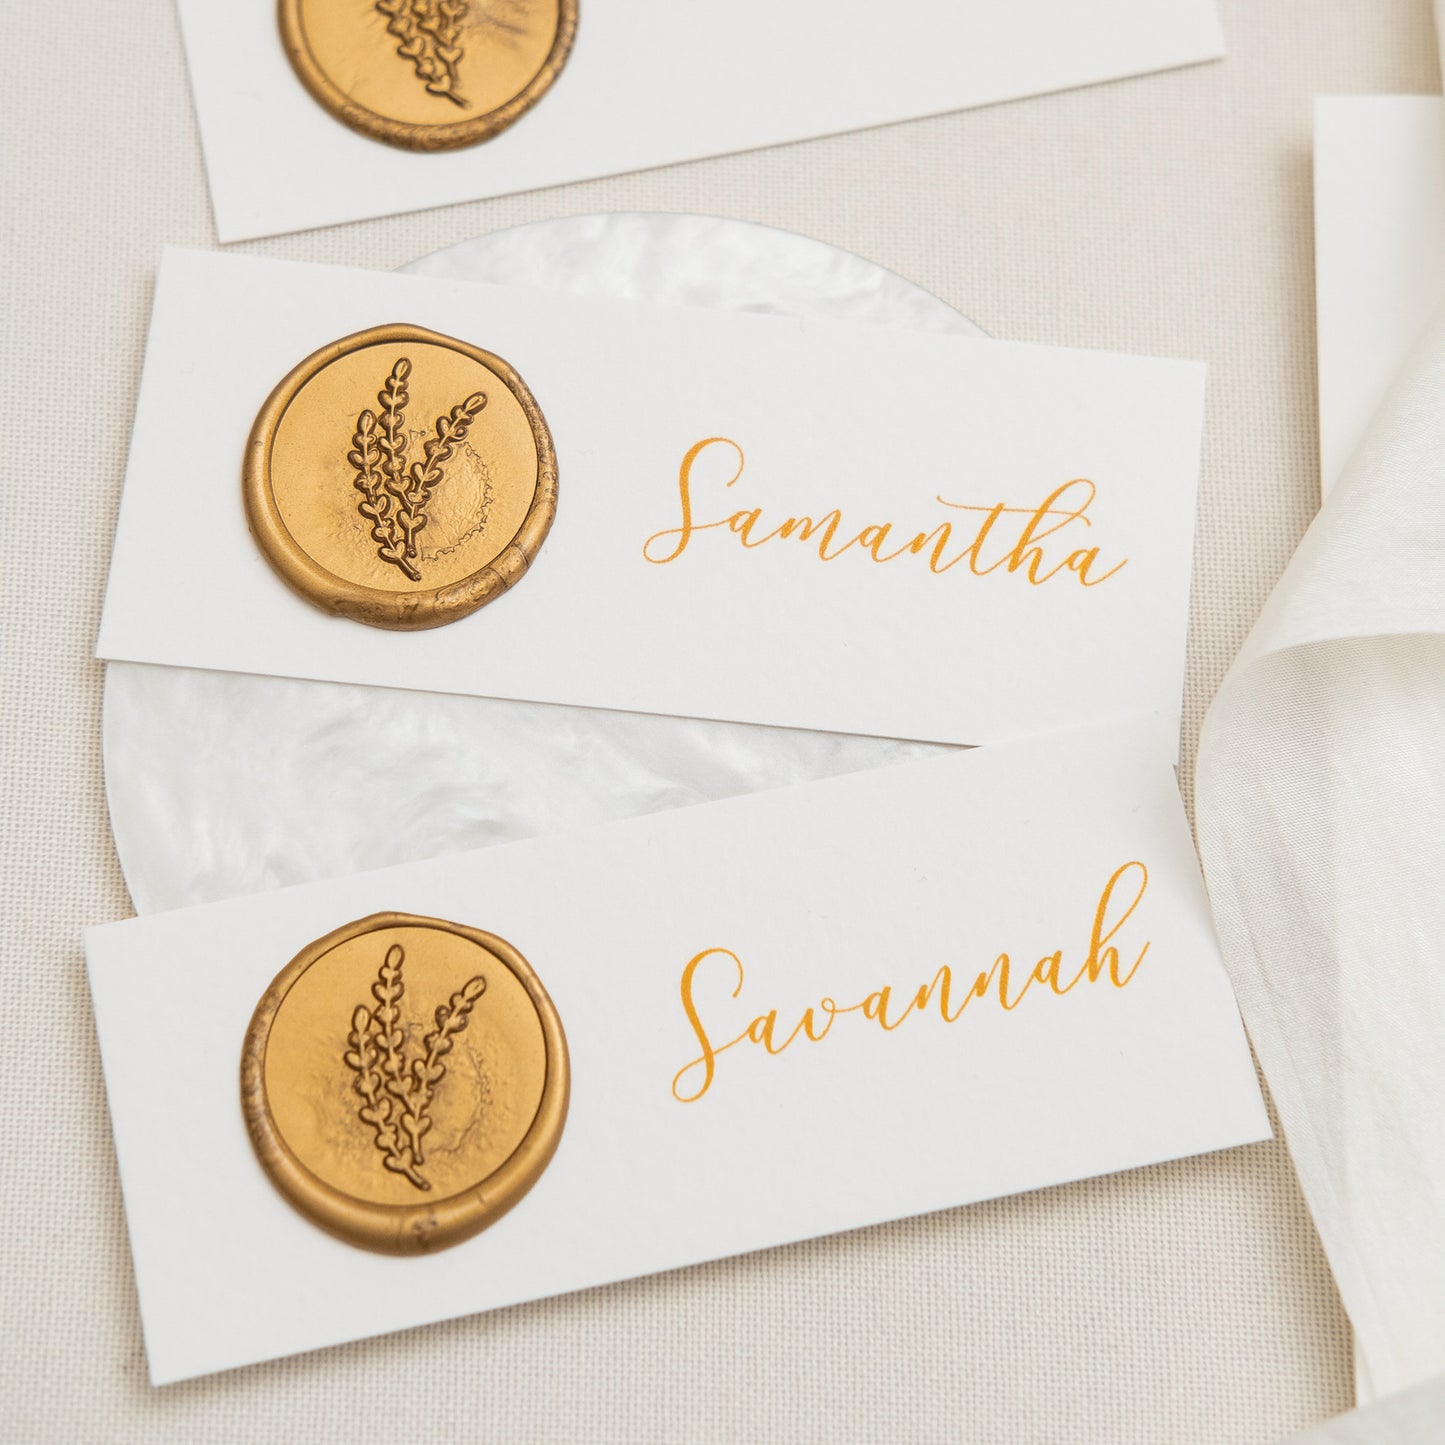 Wedding Place Cards With Wax Seal